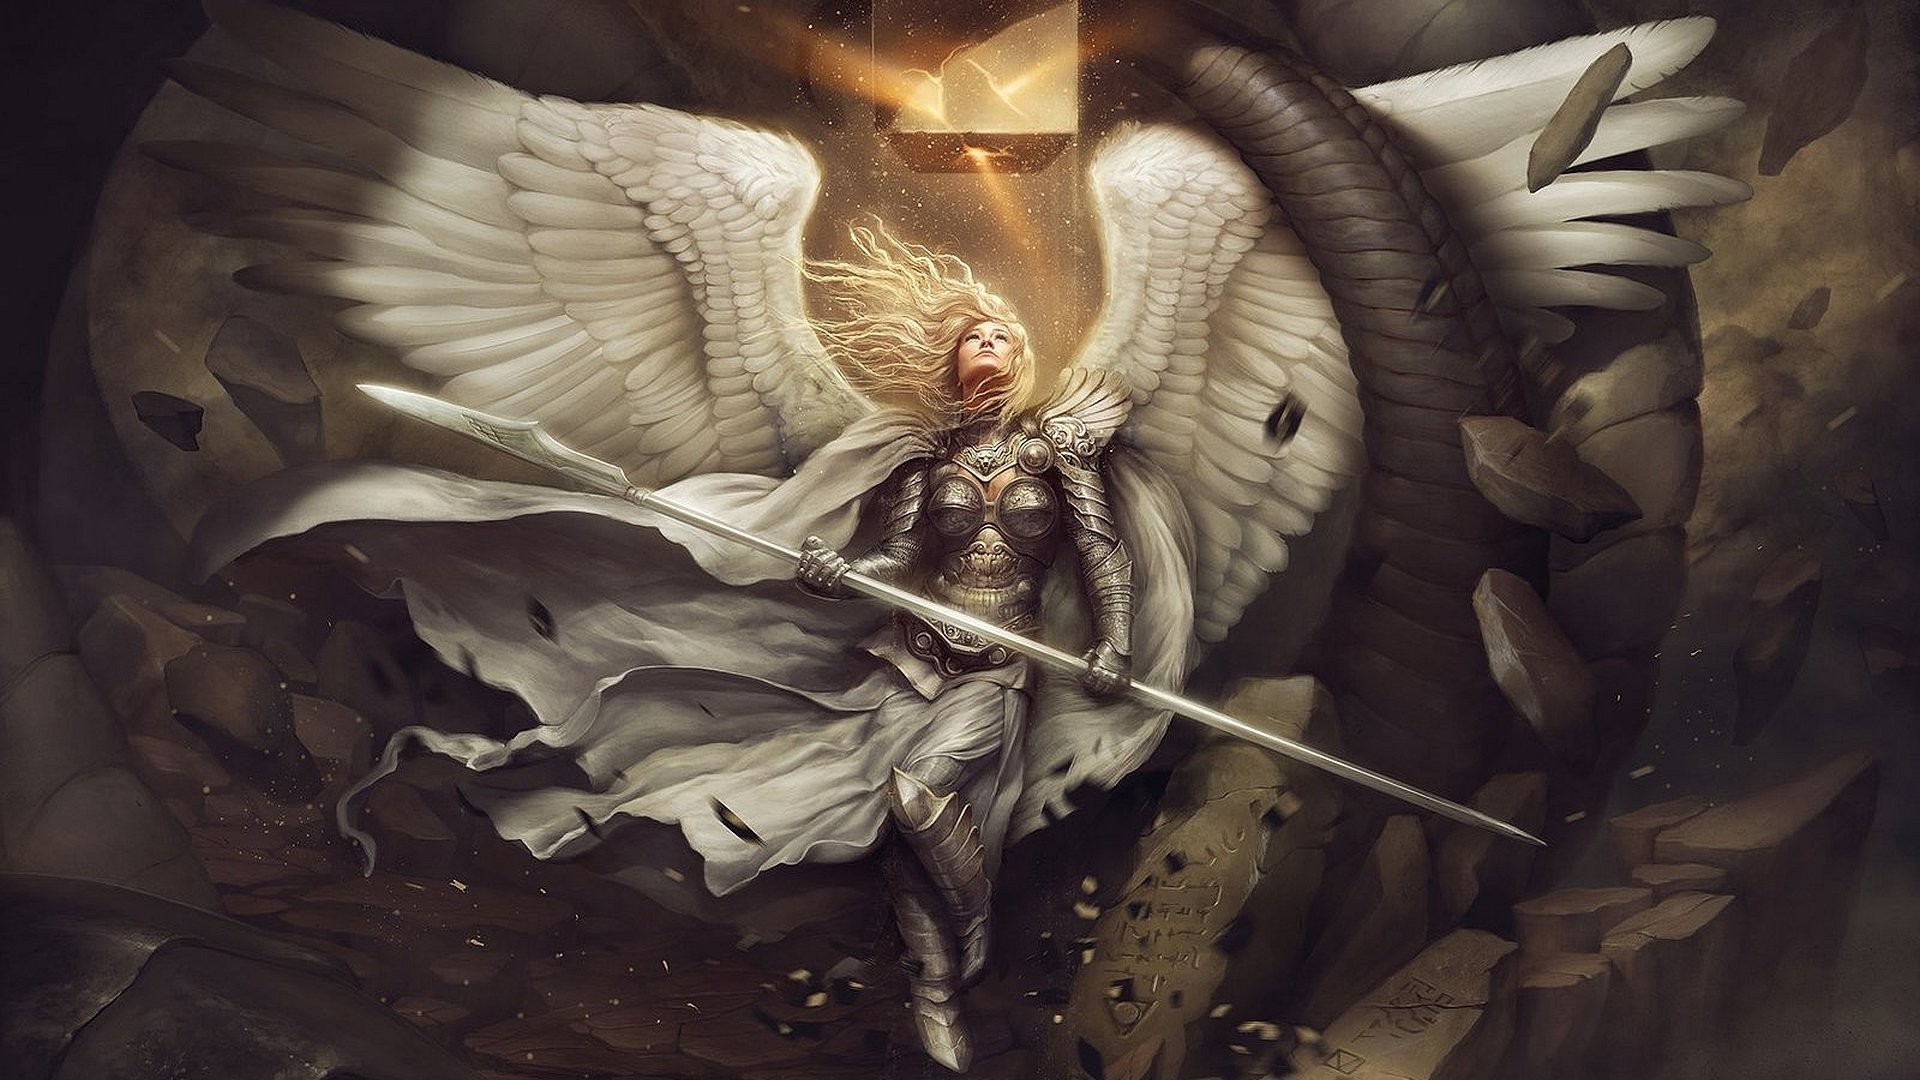 1920x1080 Angel Warrior Wing free iPhone or Android Full HD wallpaper.